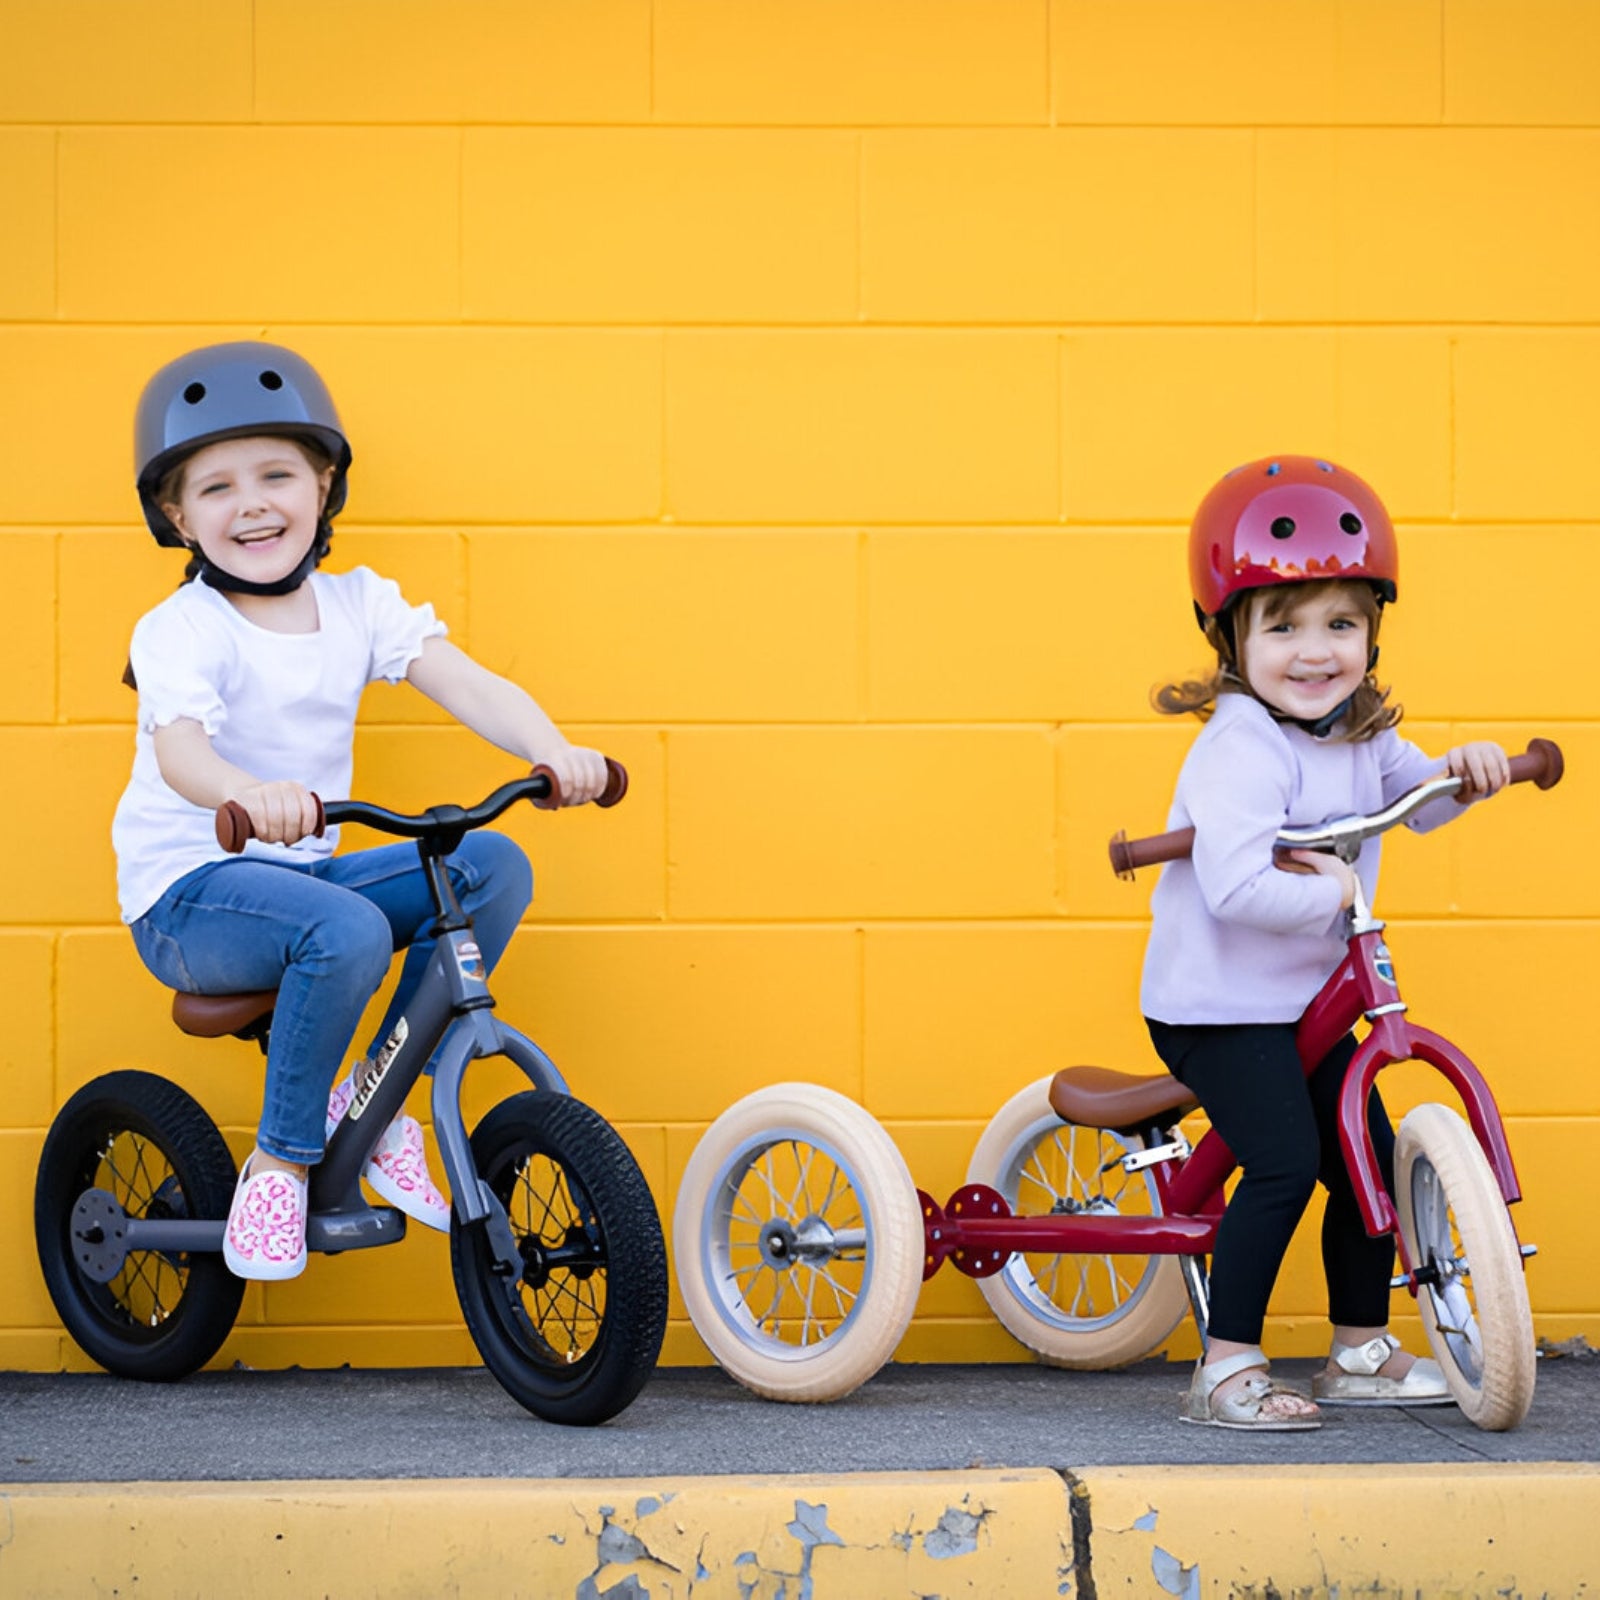 Two smiling kids sitting on their Grey Trybike and vintage red trybike in front of a bright yellow wall.